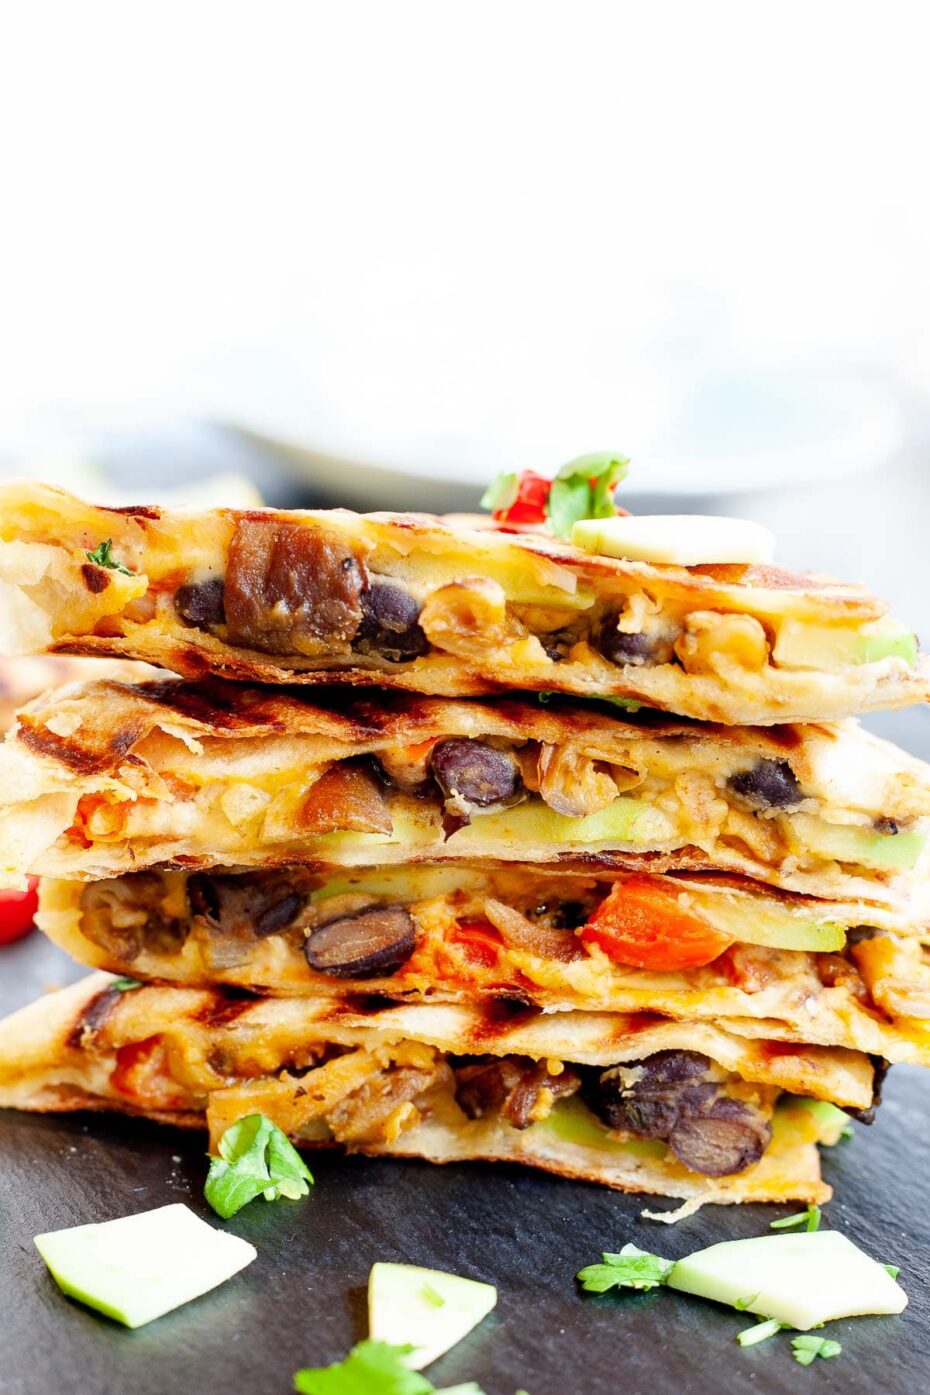 Stack of quesadilla triangles filled with black beans, red pepper, avocado slices sprinkled with fresh cilantro